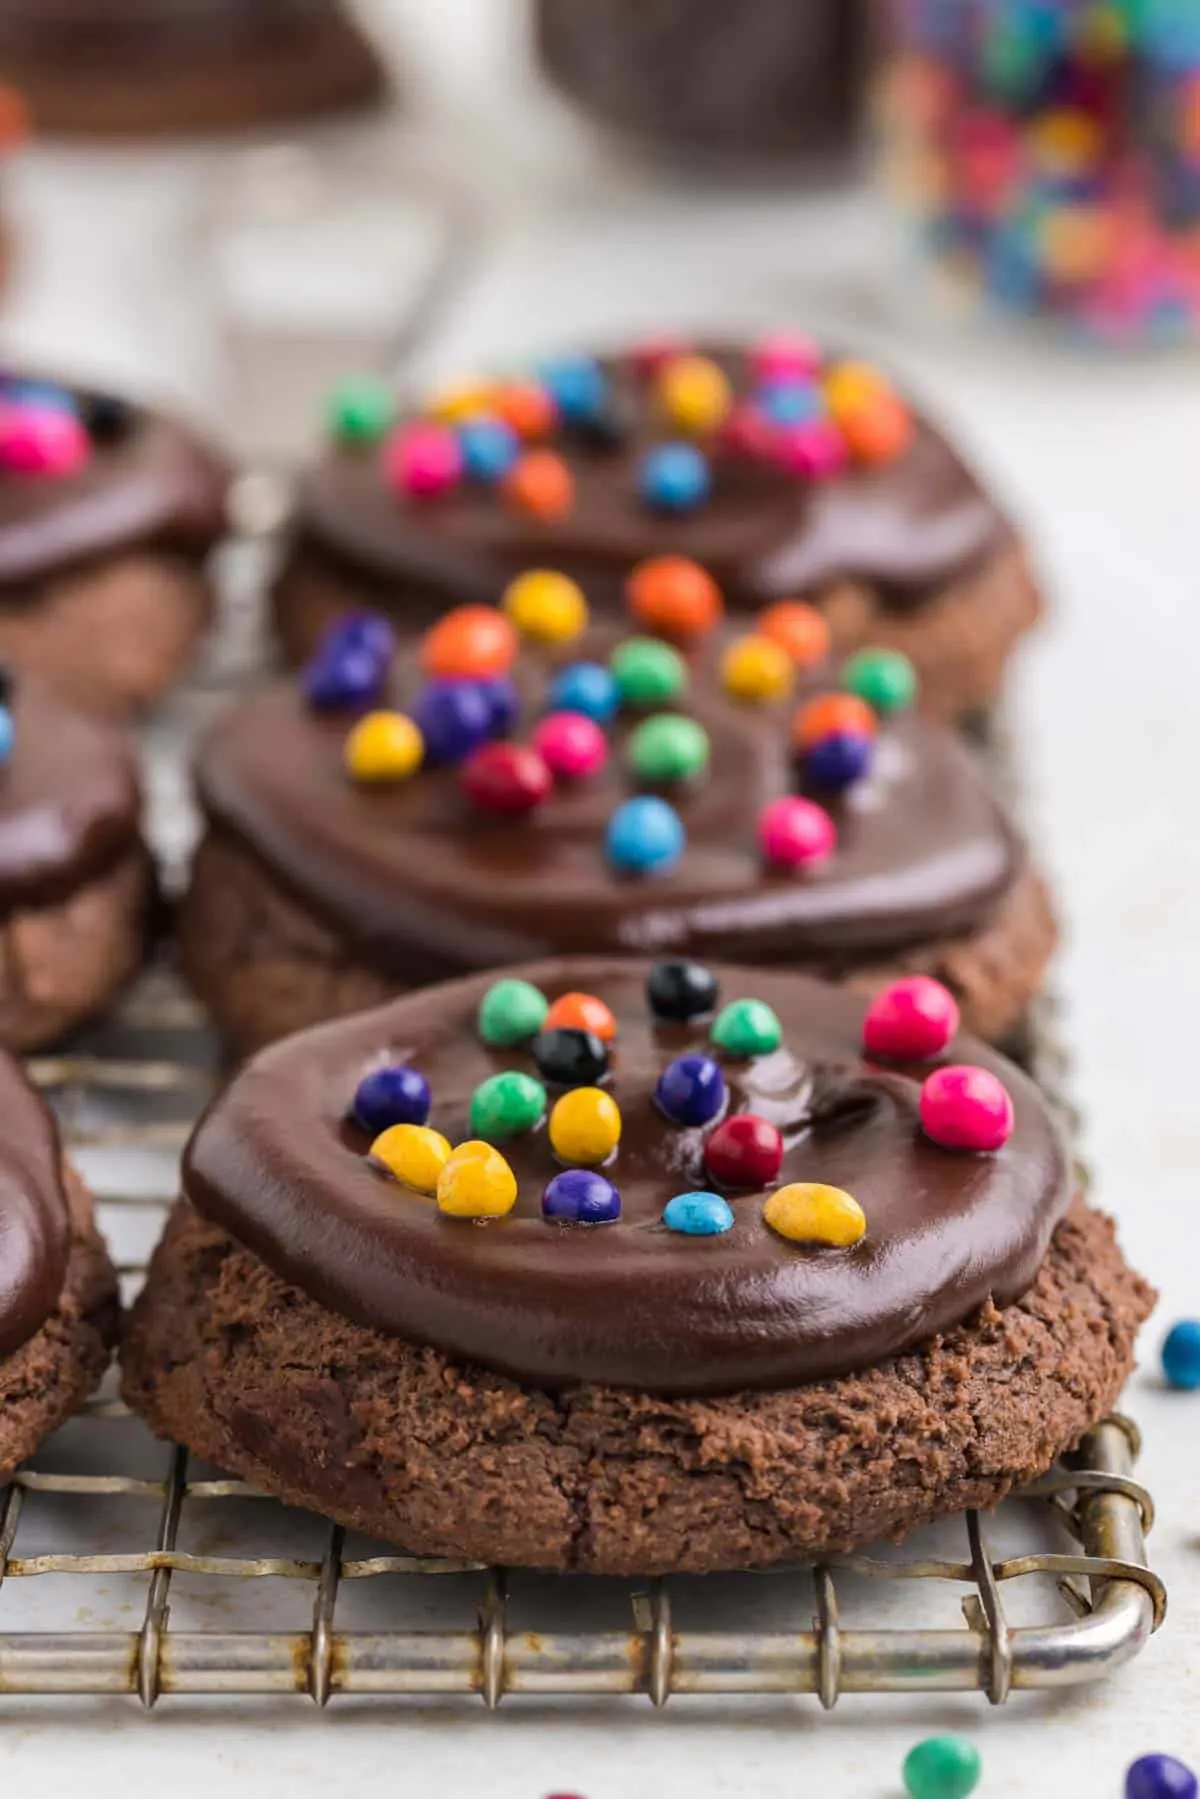 Cosmic Brownie Cookies are rich and chewy cookies made with boxed brownie mix and topped with chocolate ganache and colourful candy coated chocolate chips.